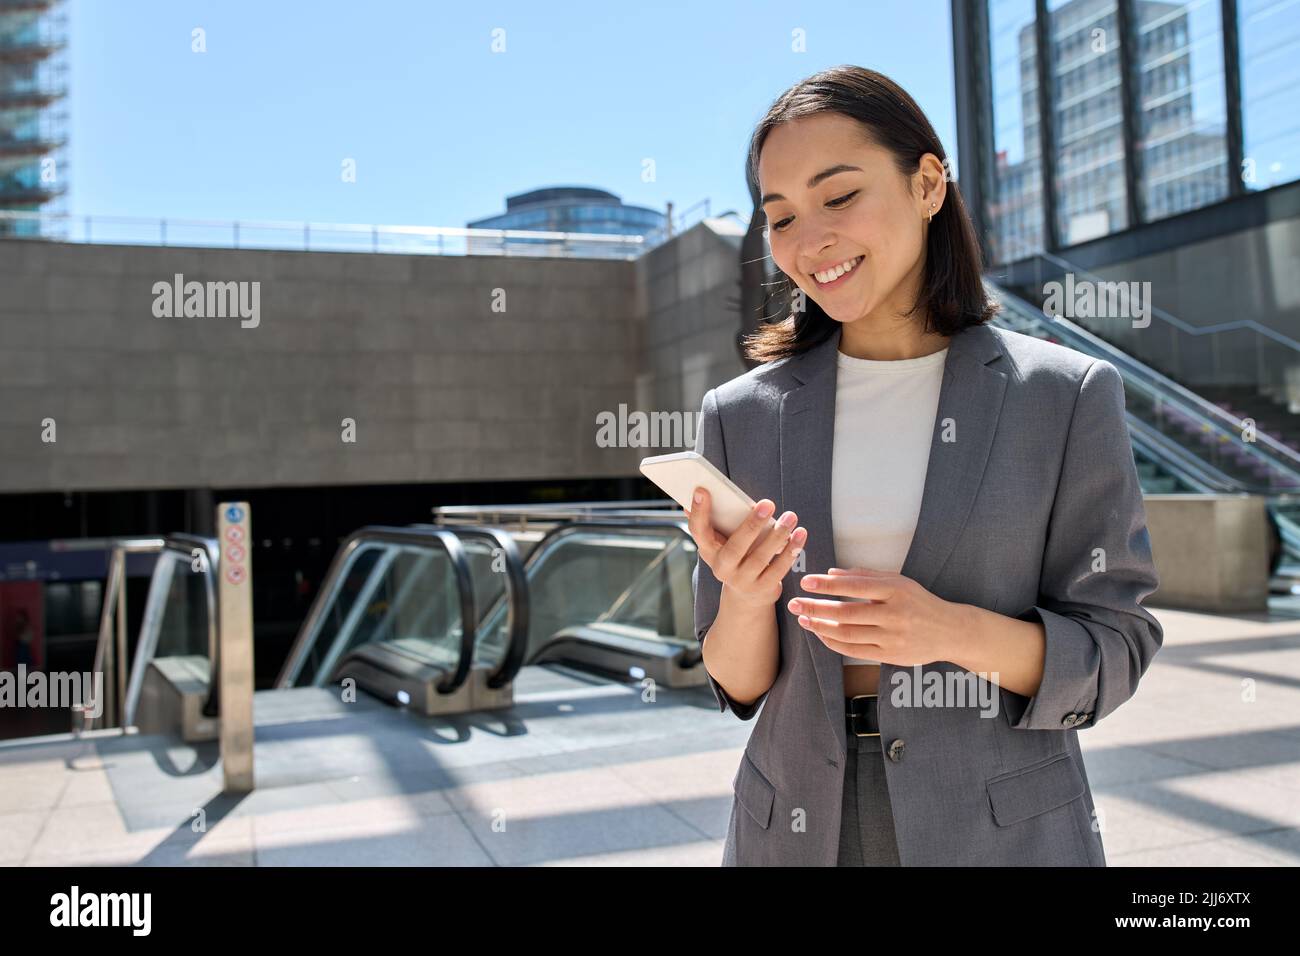 Young happy Asian business woman standing in city subway using smartphone. Stock Photo